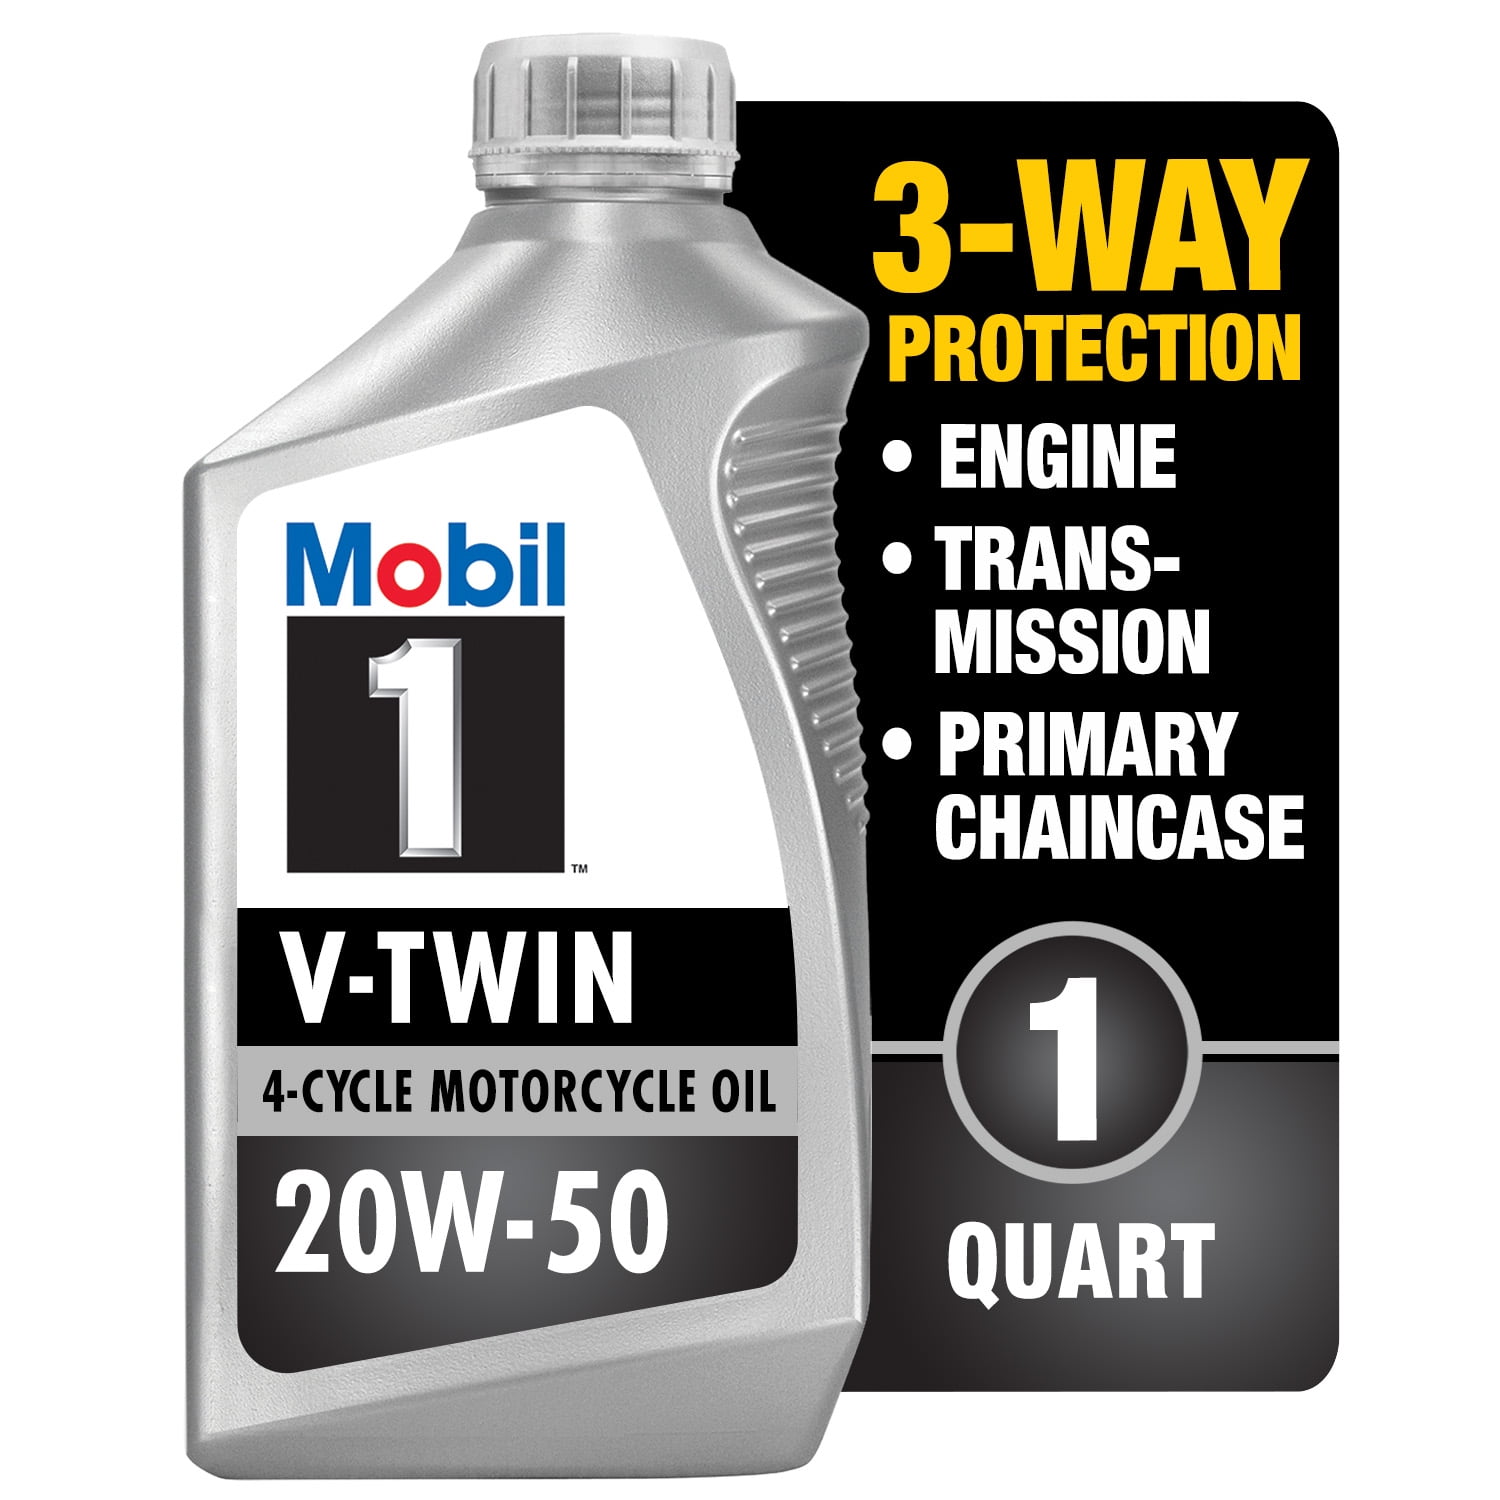 Mobil 1 V-Twin Full Synthetic Motorcycle Oil 20W-50, 1 qt